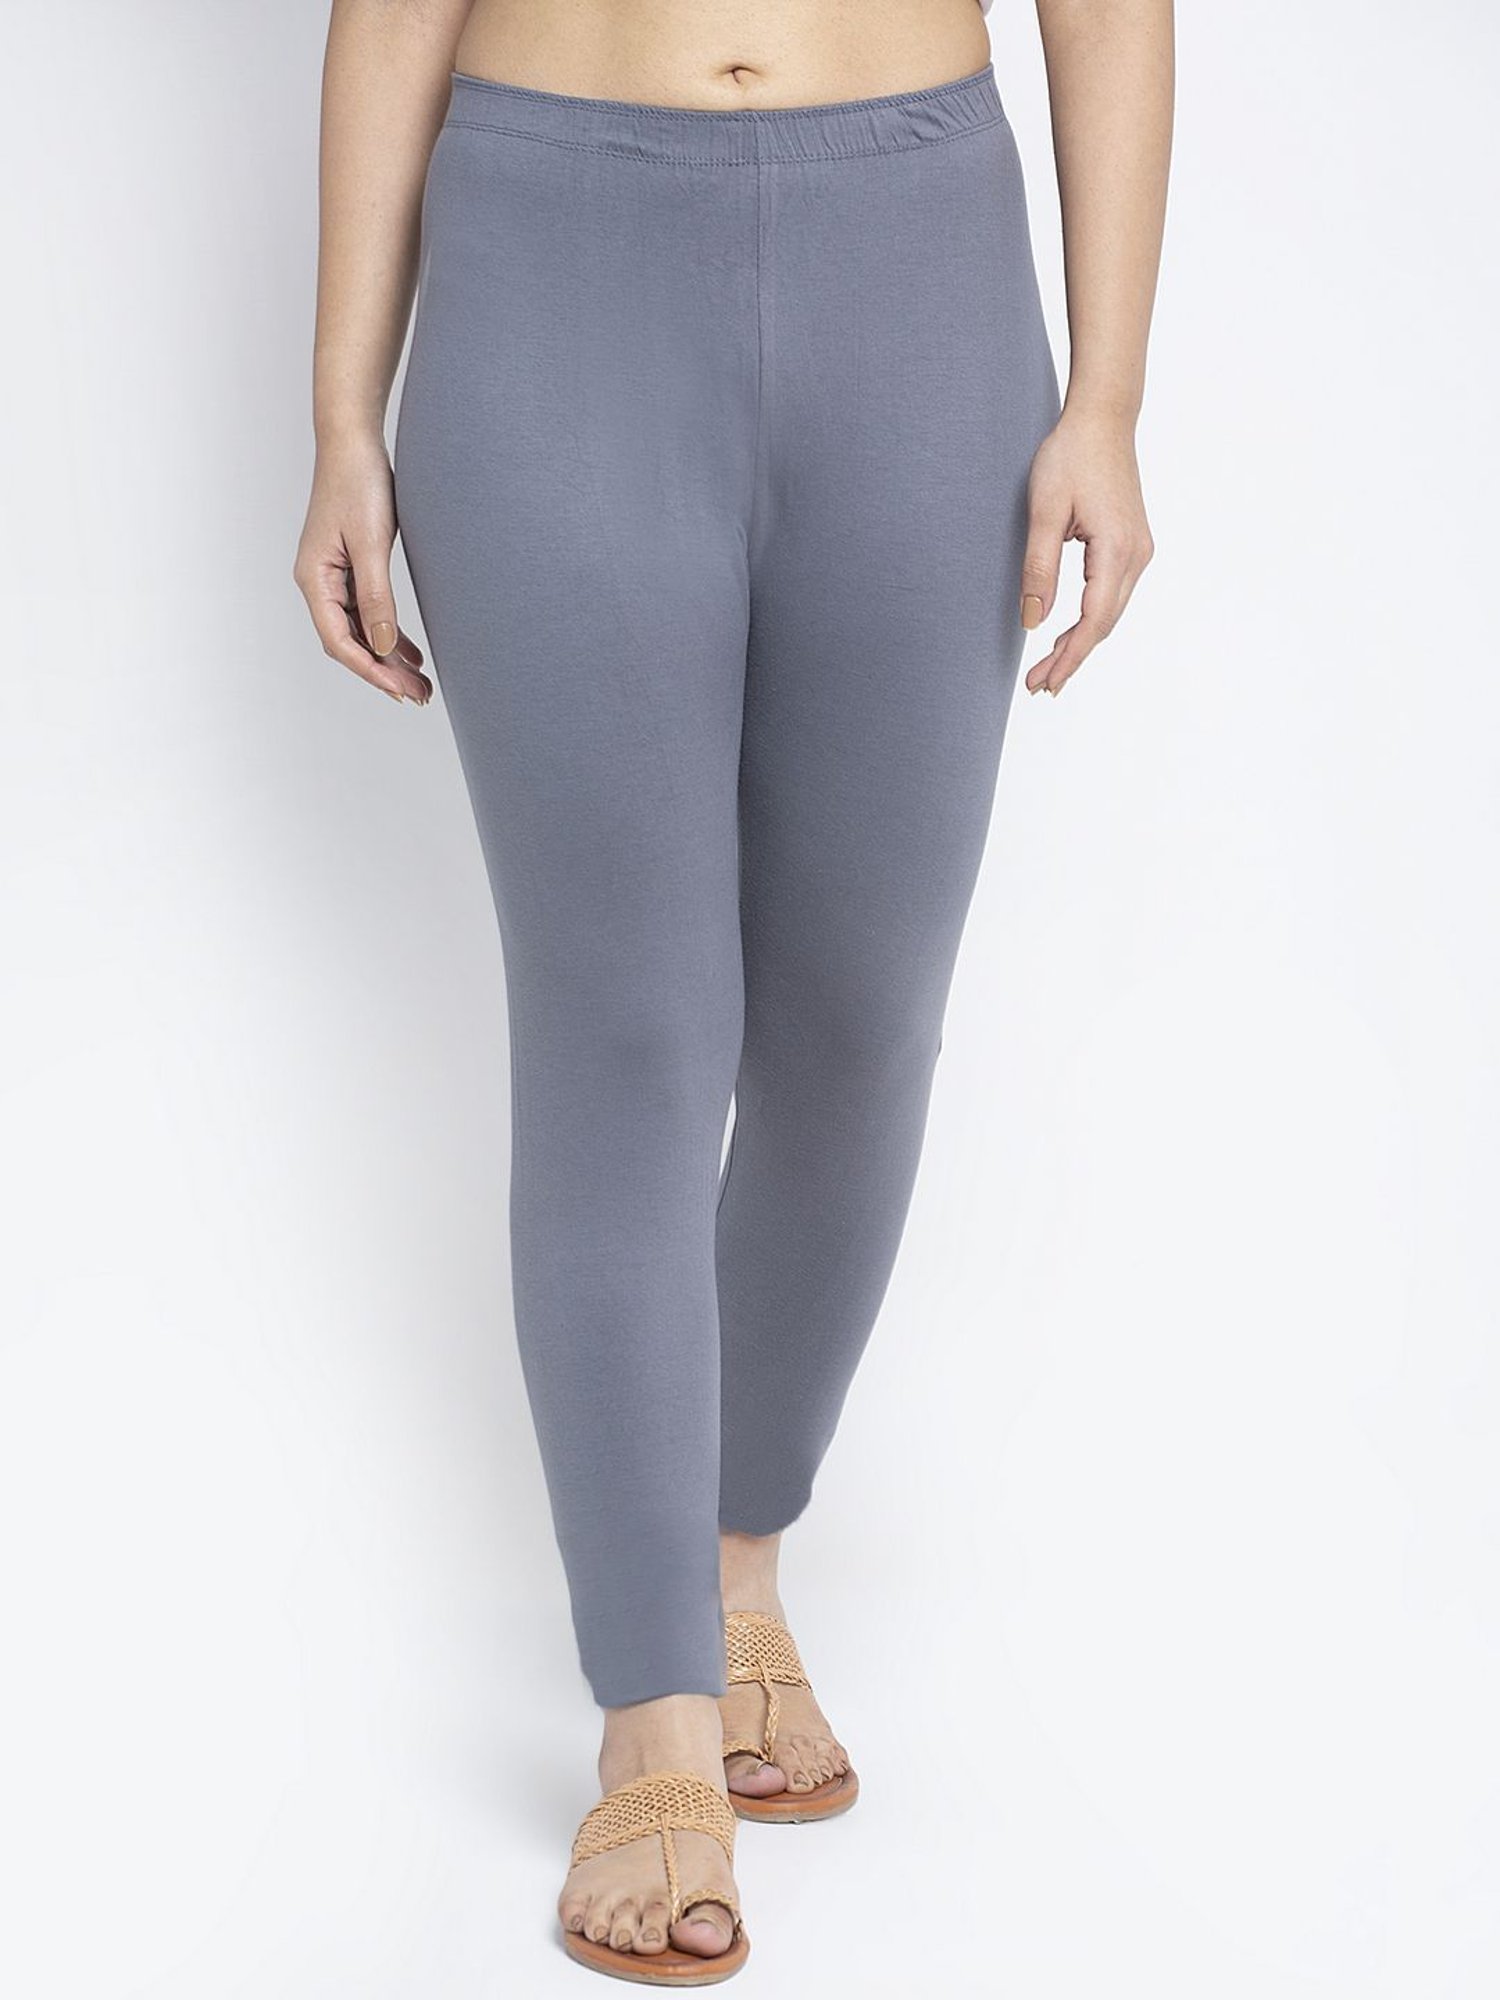 Indian Grey Plain Cotton Churidar Leggings For Ladies, Stretchable,  Breathable at Best Price in Tirupur | Mars Garments